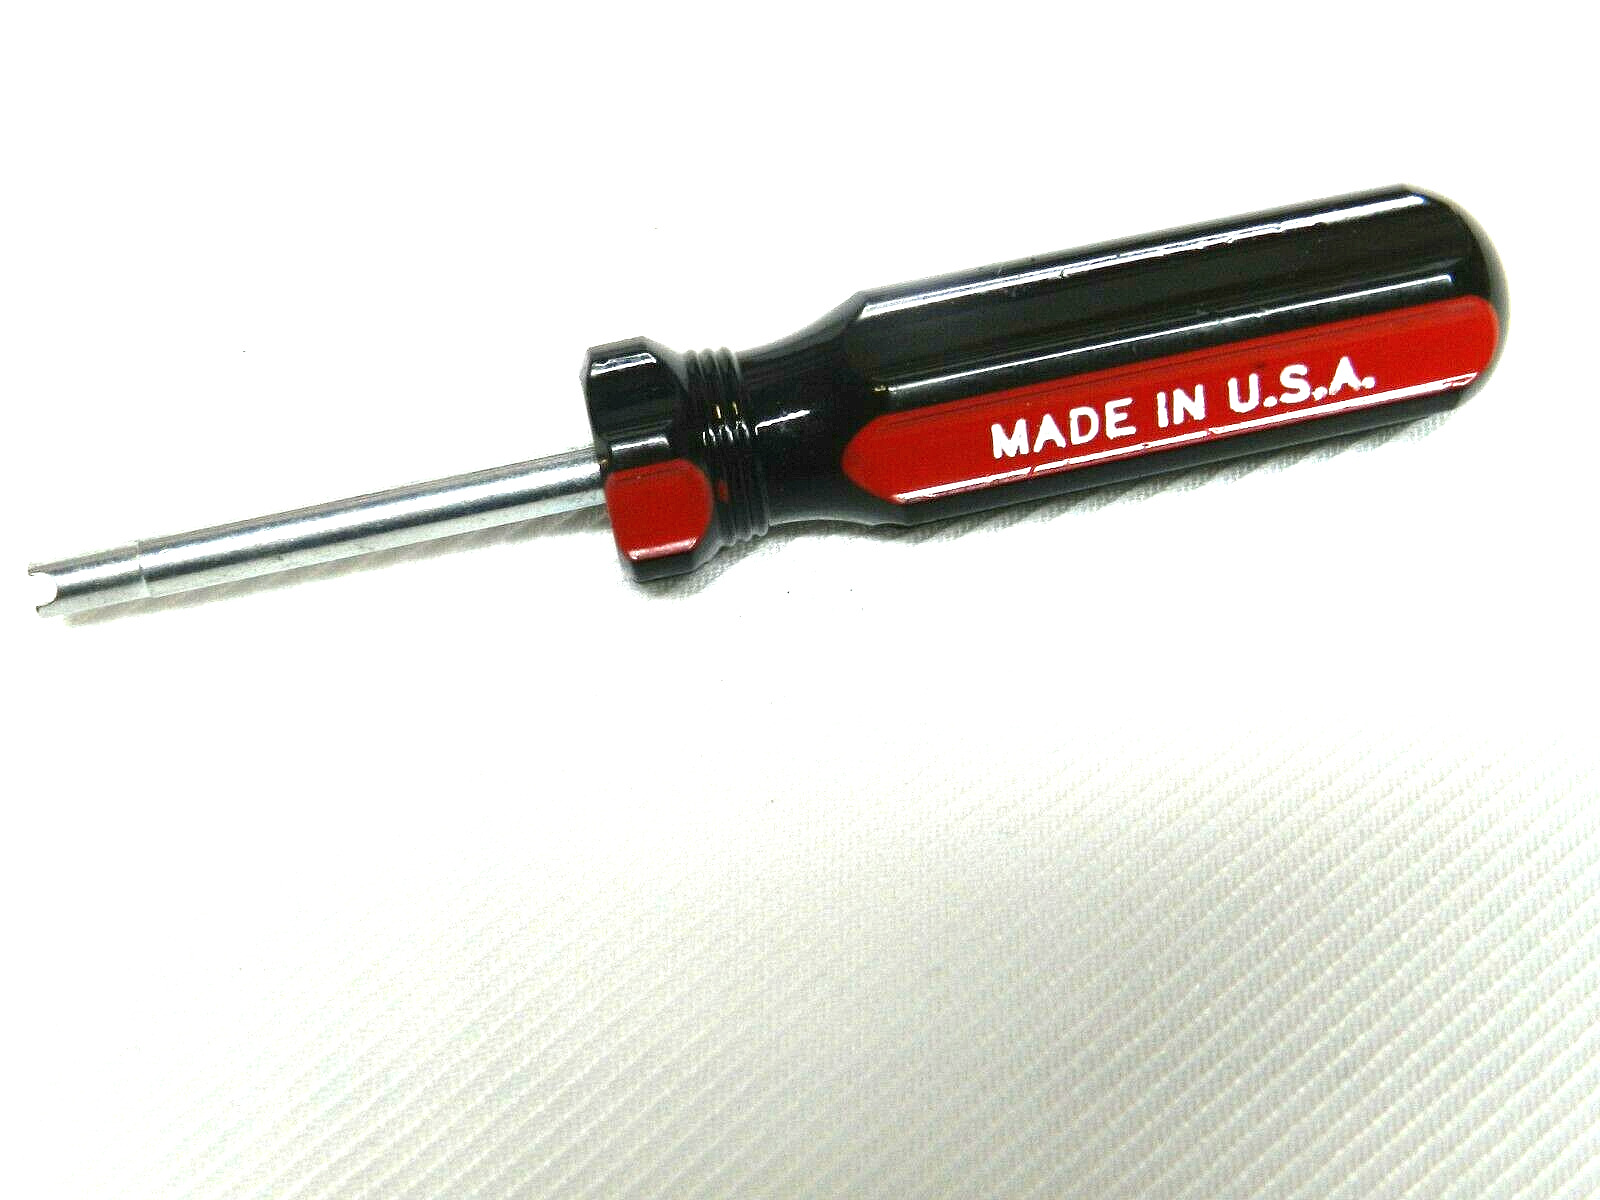 Valve core Tool made in the USA -professional